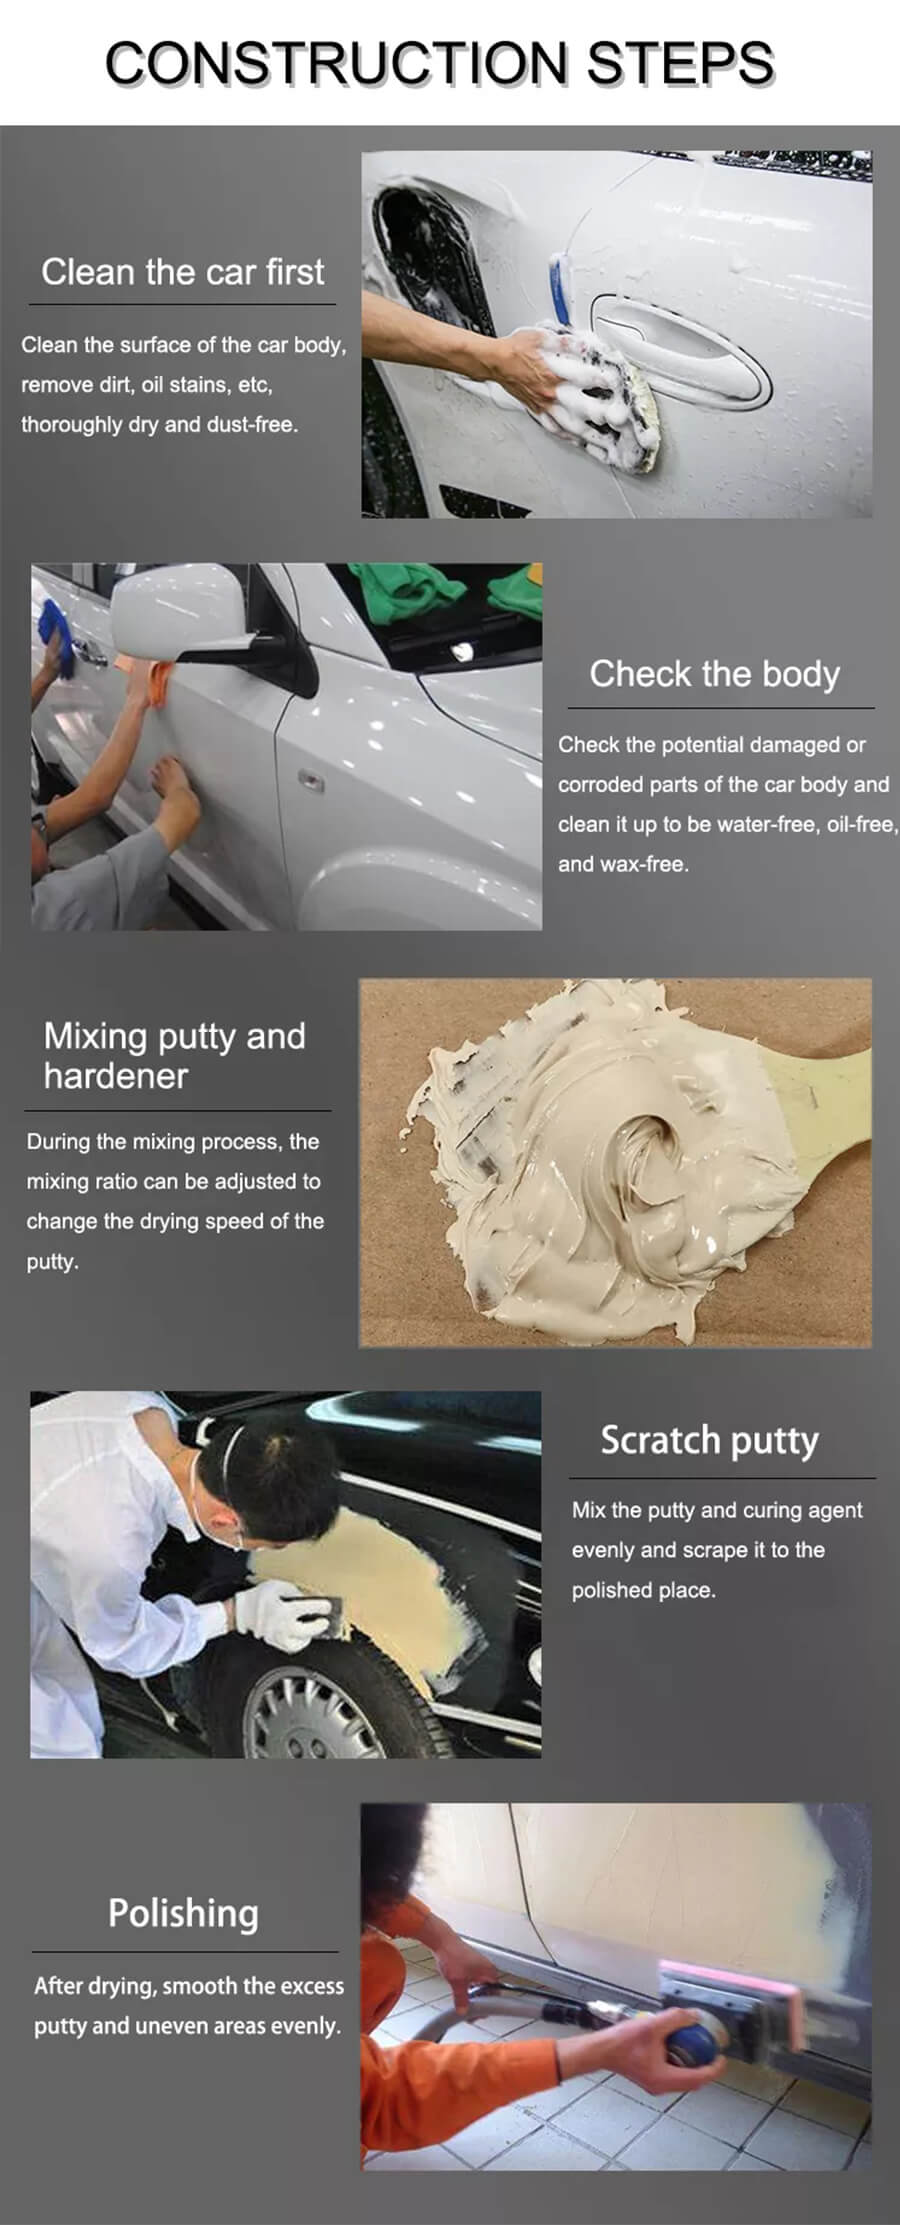 Good Price Car Putty Body Filler Polyester Putty Factory Direct Supply -  China Car Body Filler, Automotive Body Filler